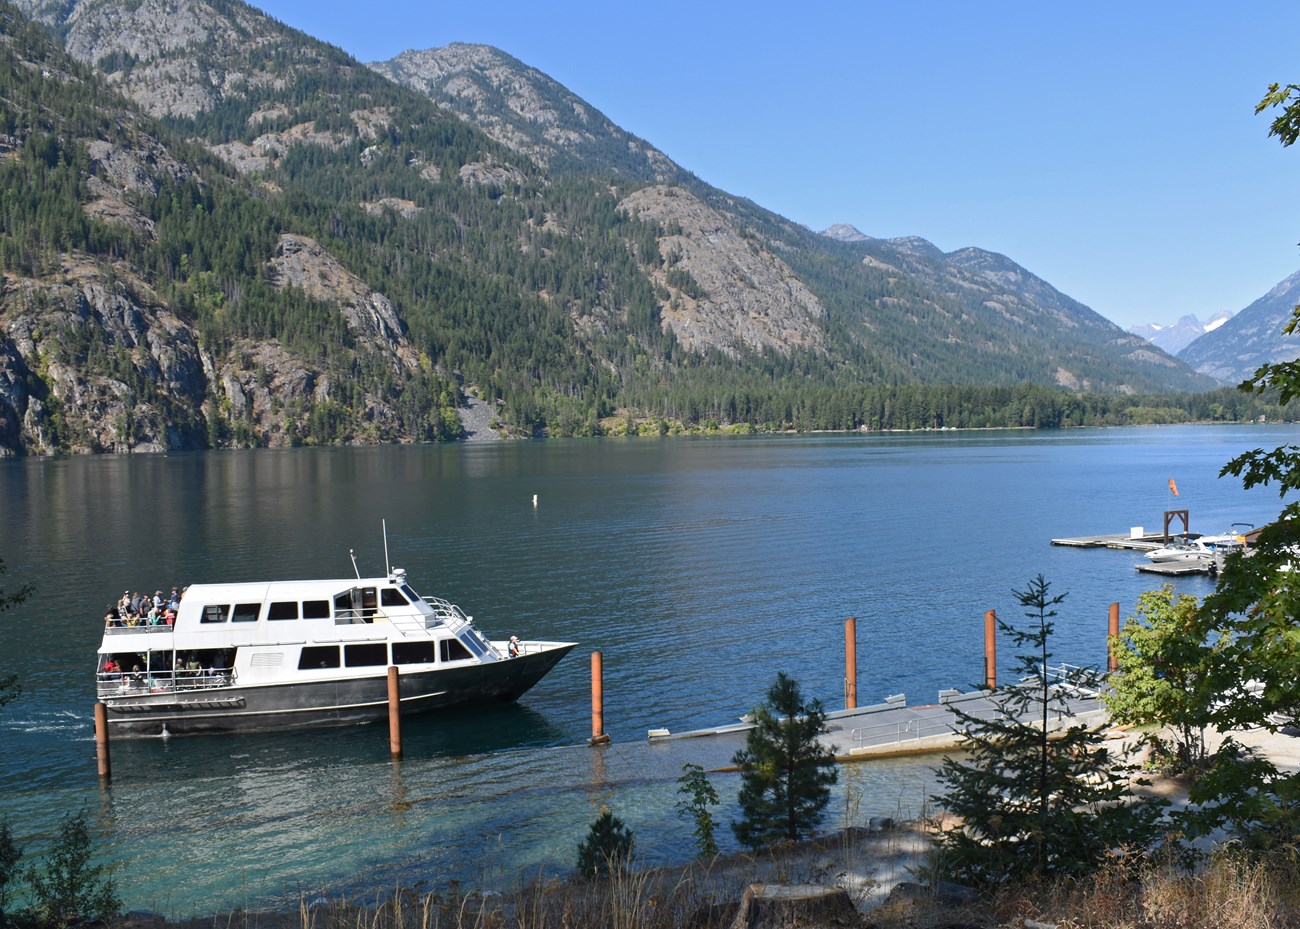 A silver ferry arrives at a dock on a large lake with mountains in the distance.